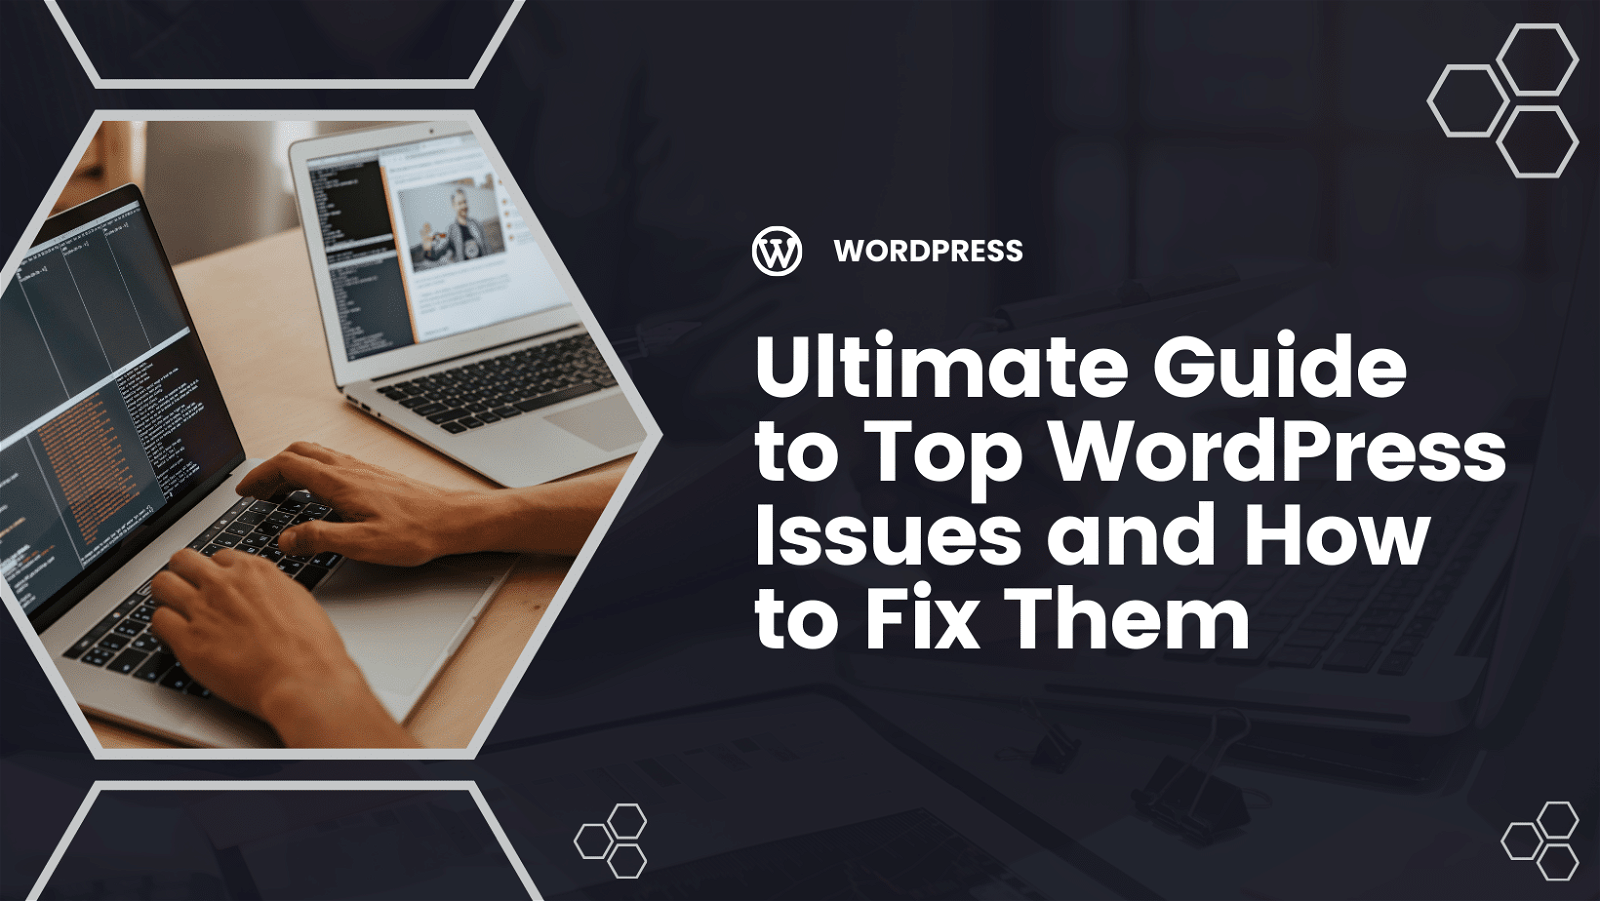 Promotional graphic for a Wordpress guide, featuring an individual typing on a laptop with an overlay text "ultimate guide to top WordPress issues and how to fix them.